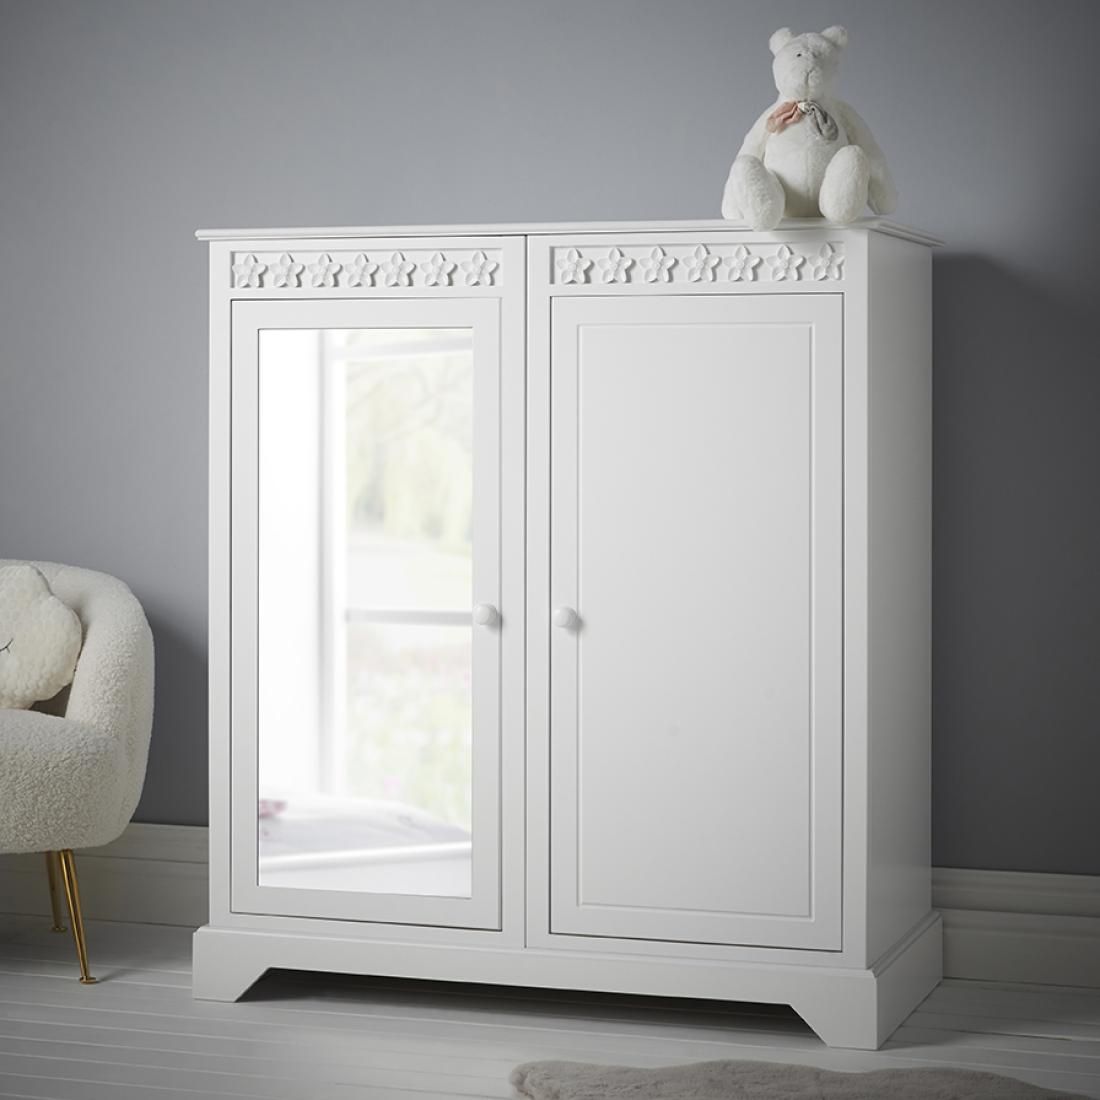 Daisy Brambles Mirrored All Hanging Mini Wardrobe | Luxury Childrens  Furniture Within Small Tallboy Wardrobes (View 8 of 15)